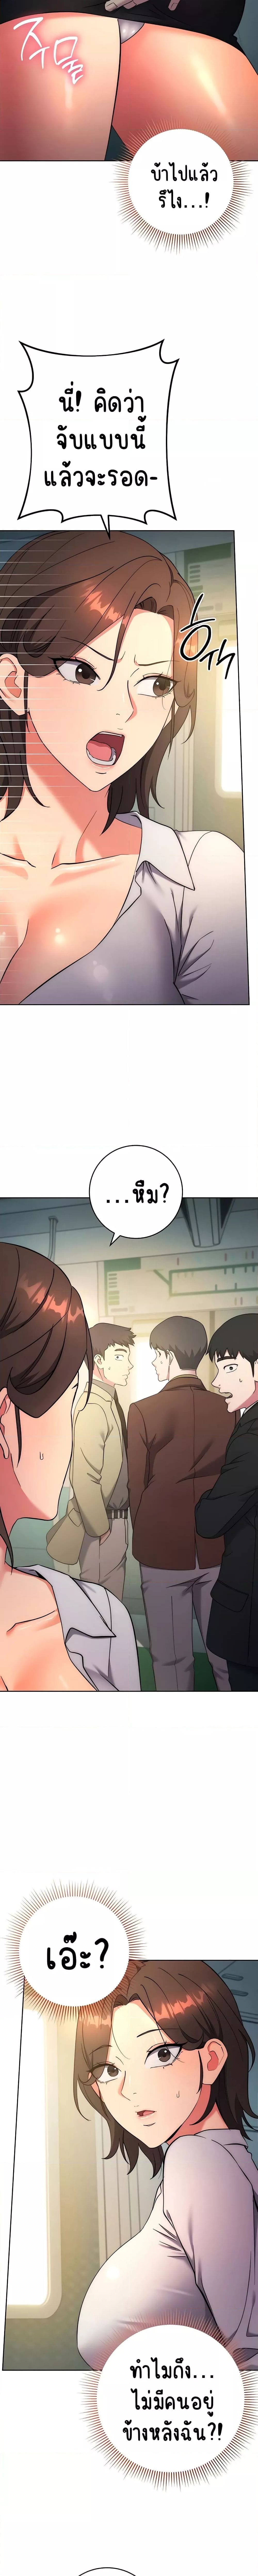 Outsider: The Invisible Man ตอนที่ 9 ภาพ 11